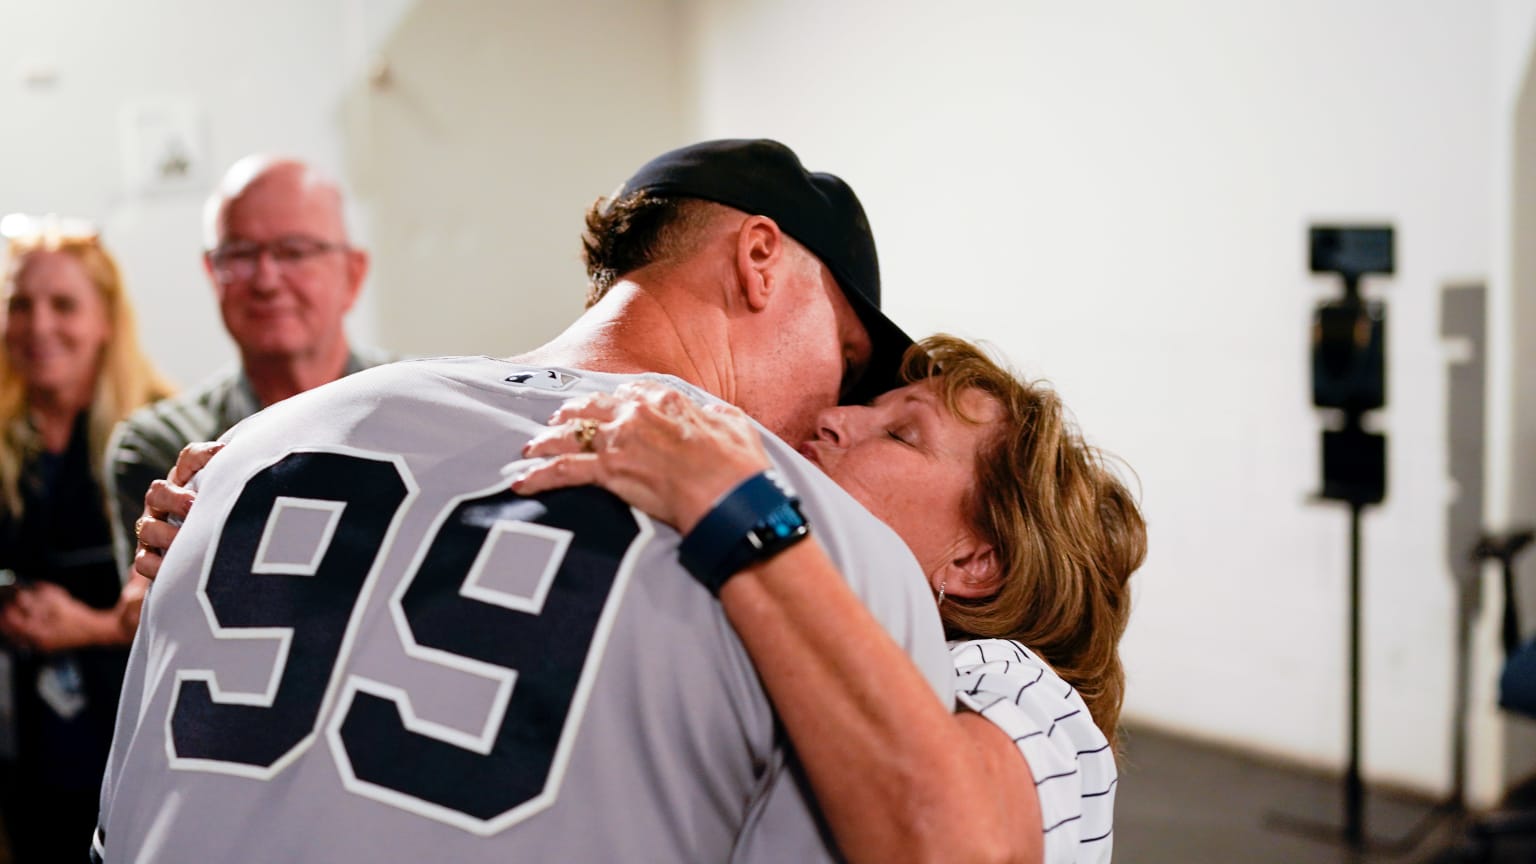 Shown from behind, the 99 on his back, Aaron Judge leans down to hug his mom and kiss her cheek